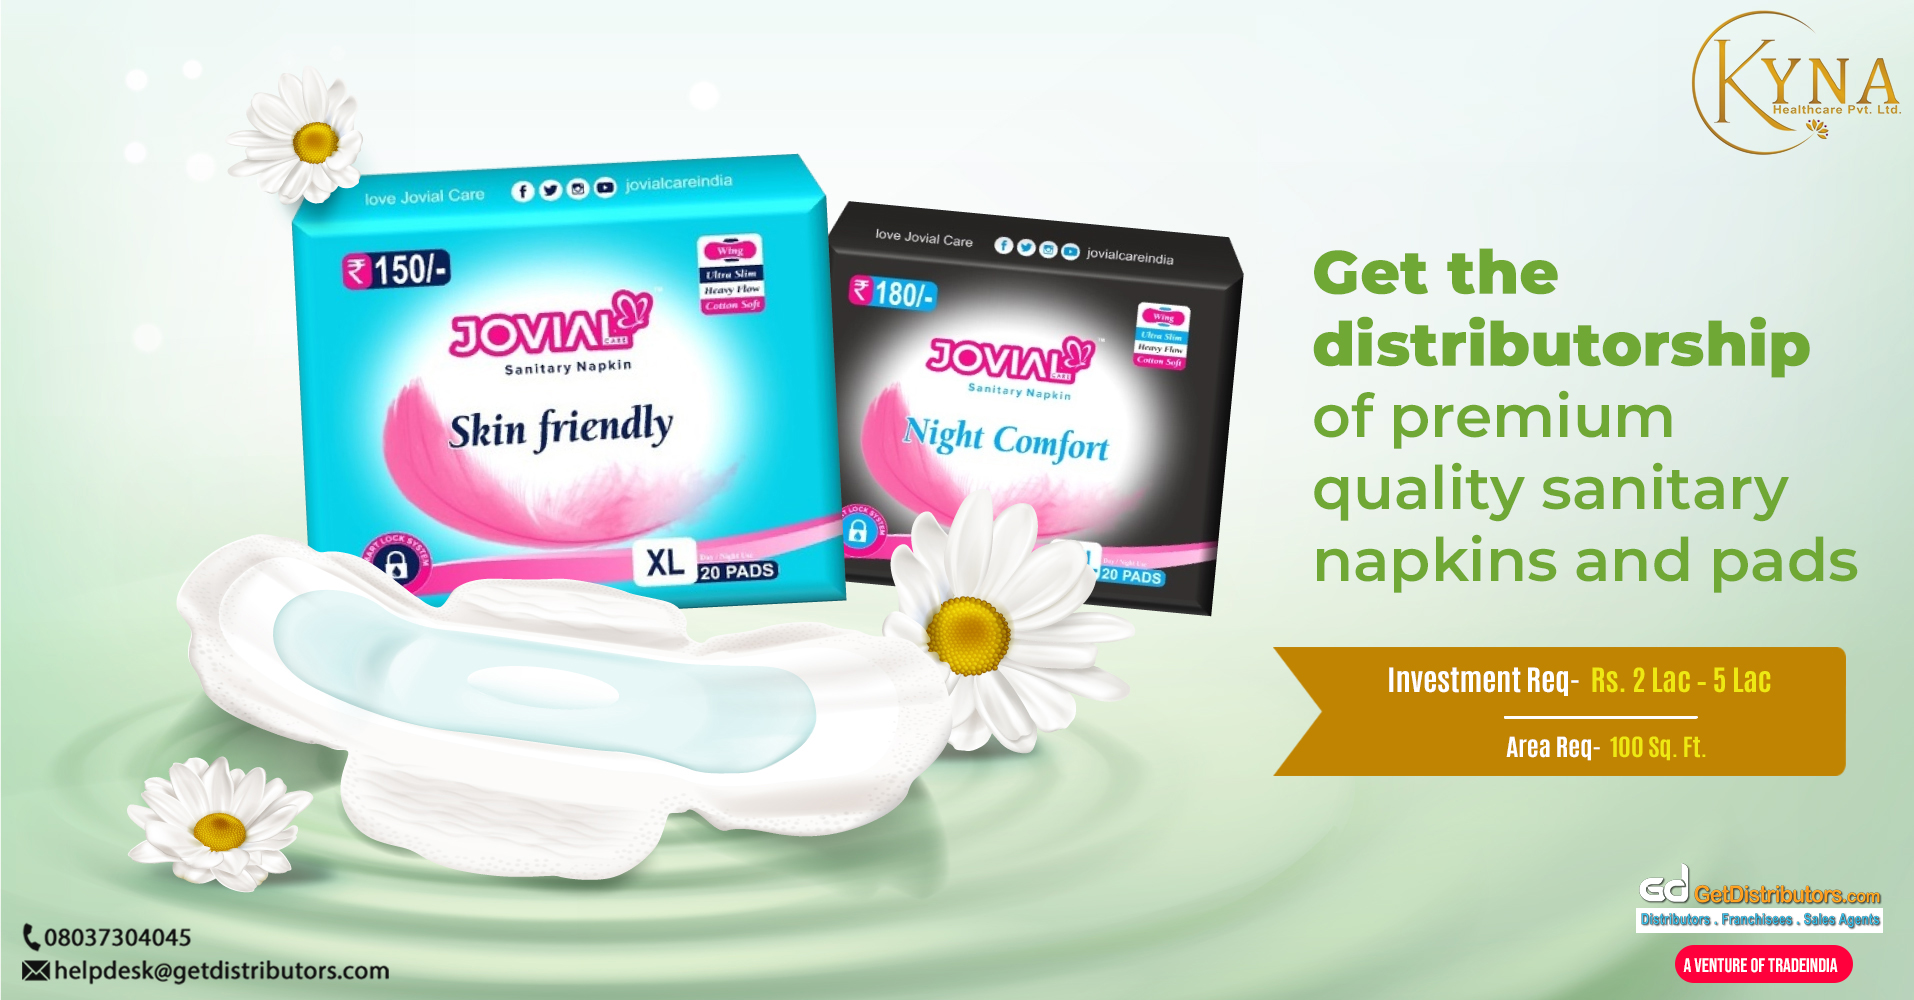 High-quality sanitary napkins and other products for distribution